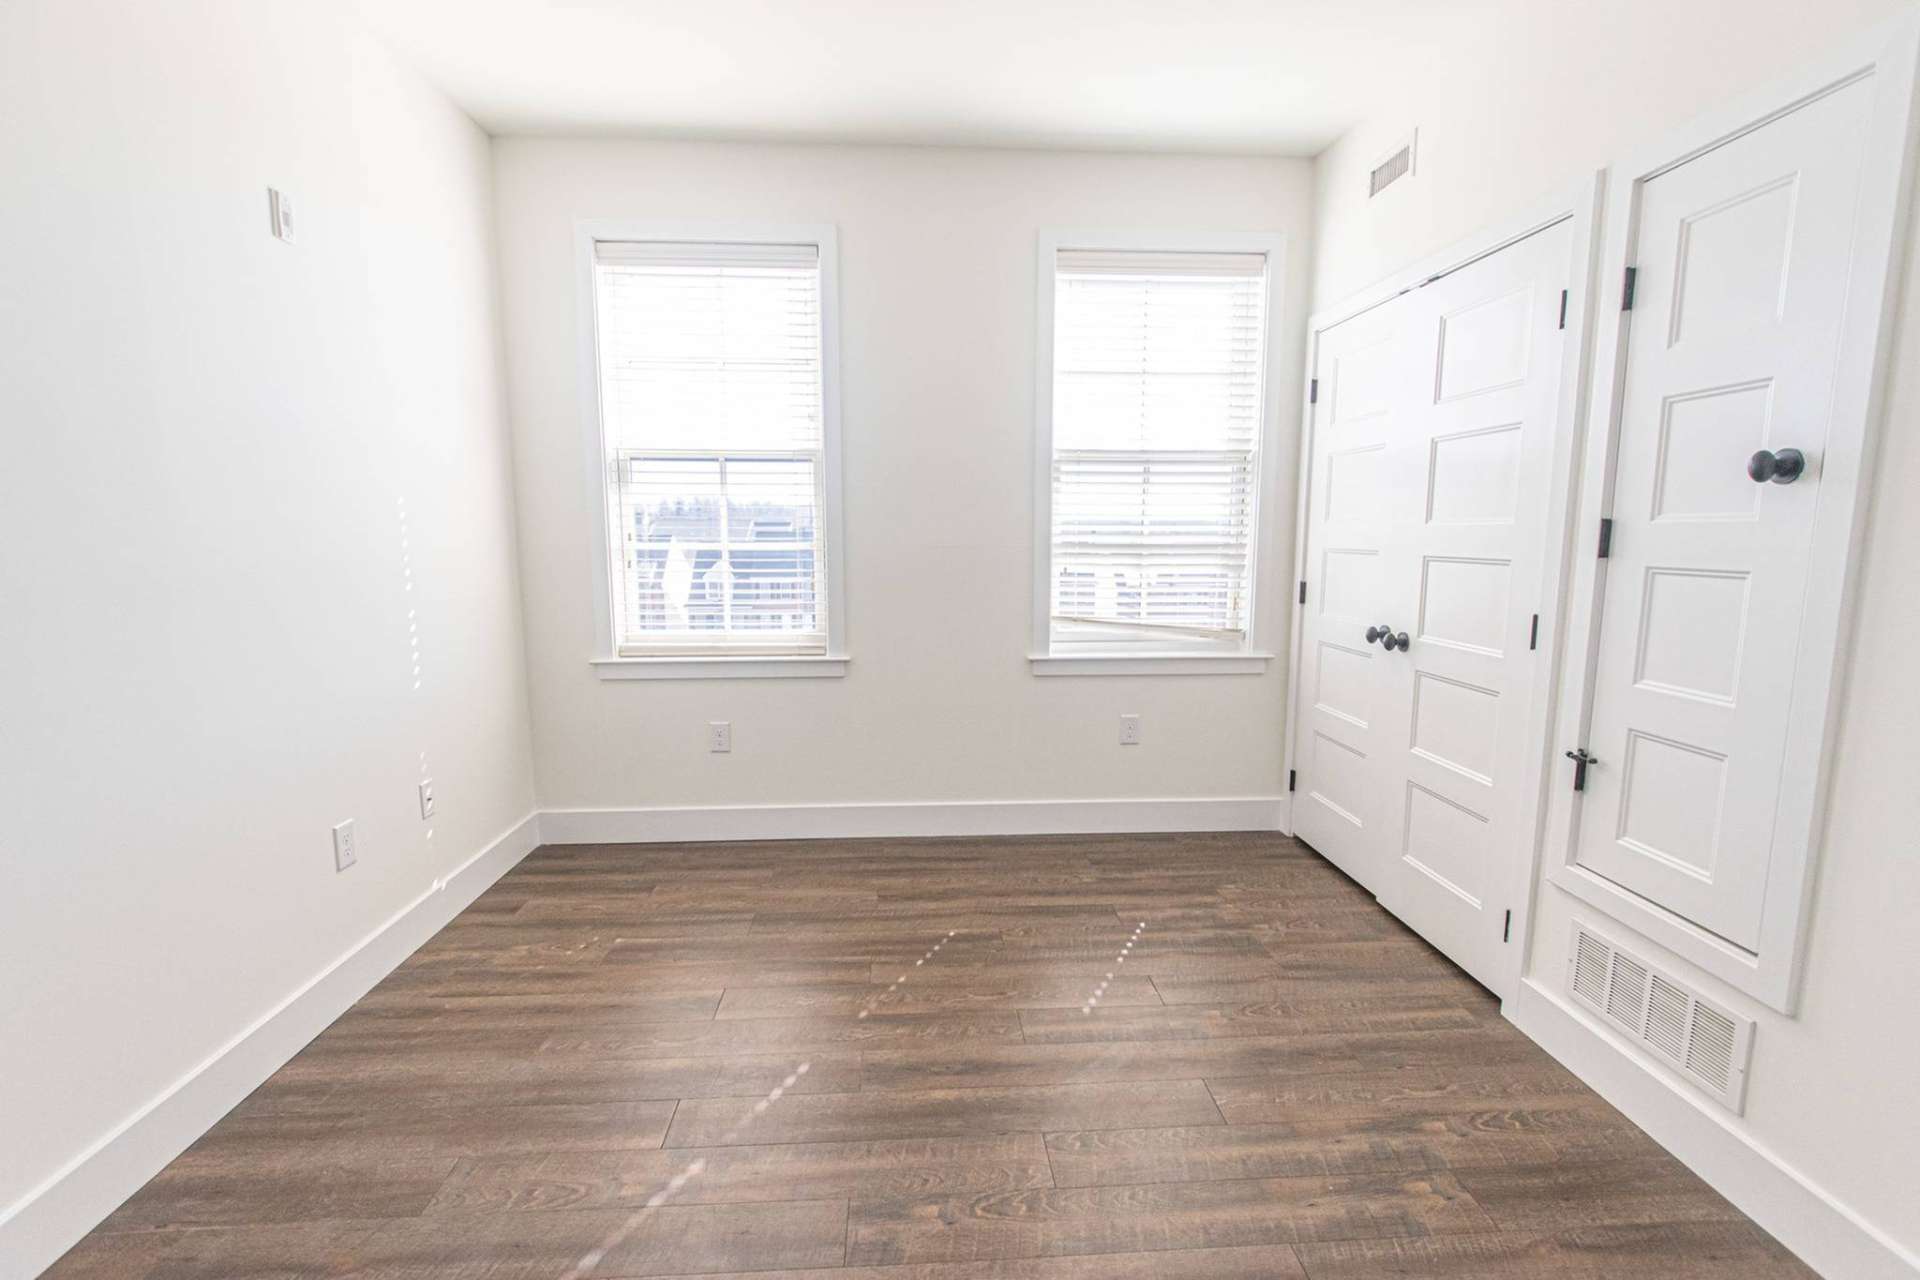 Bedroom with hardwood-style flooring, a closet, and 2 windows.